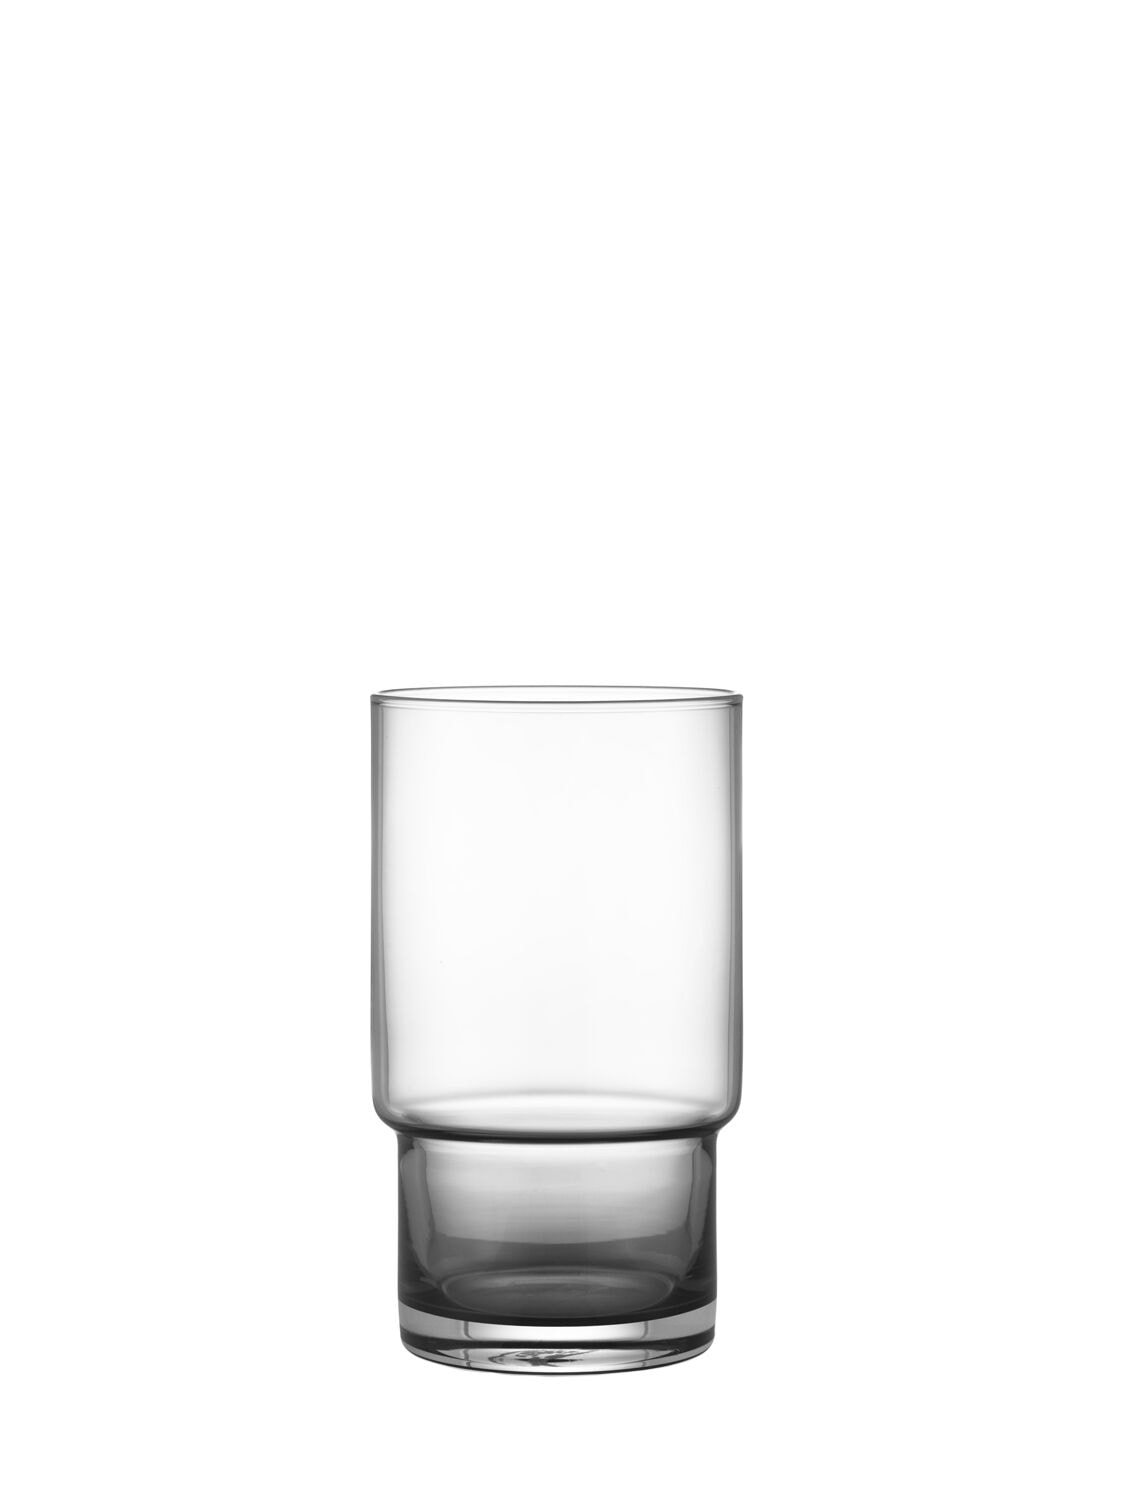 Image of Set Of 4 Large Fit Glasses